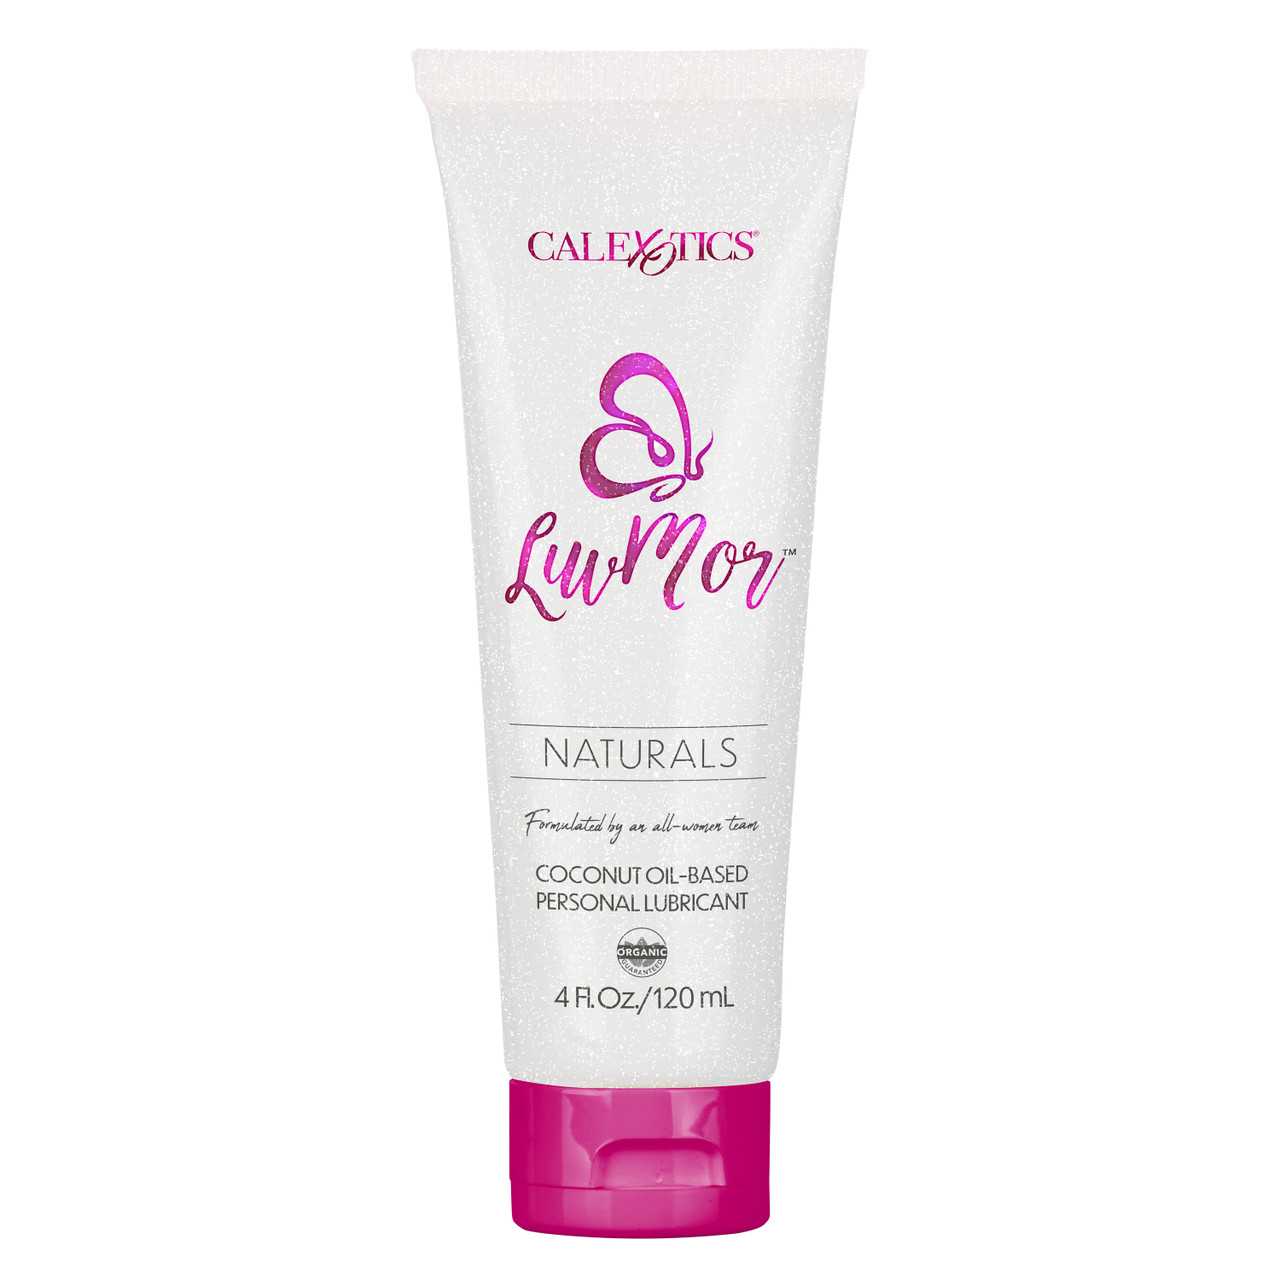 LUVMOR NATURALS COCONUT OIL BASED PERSONAL LUBRICANT 4oz 